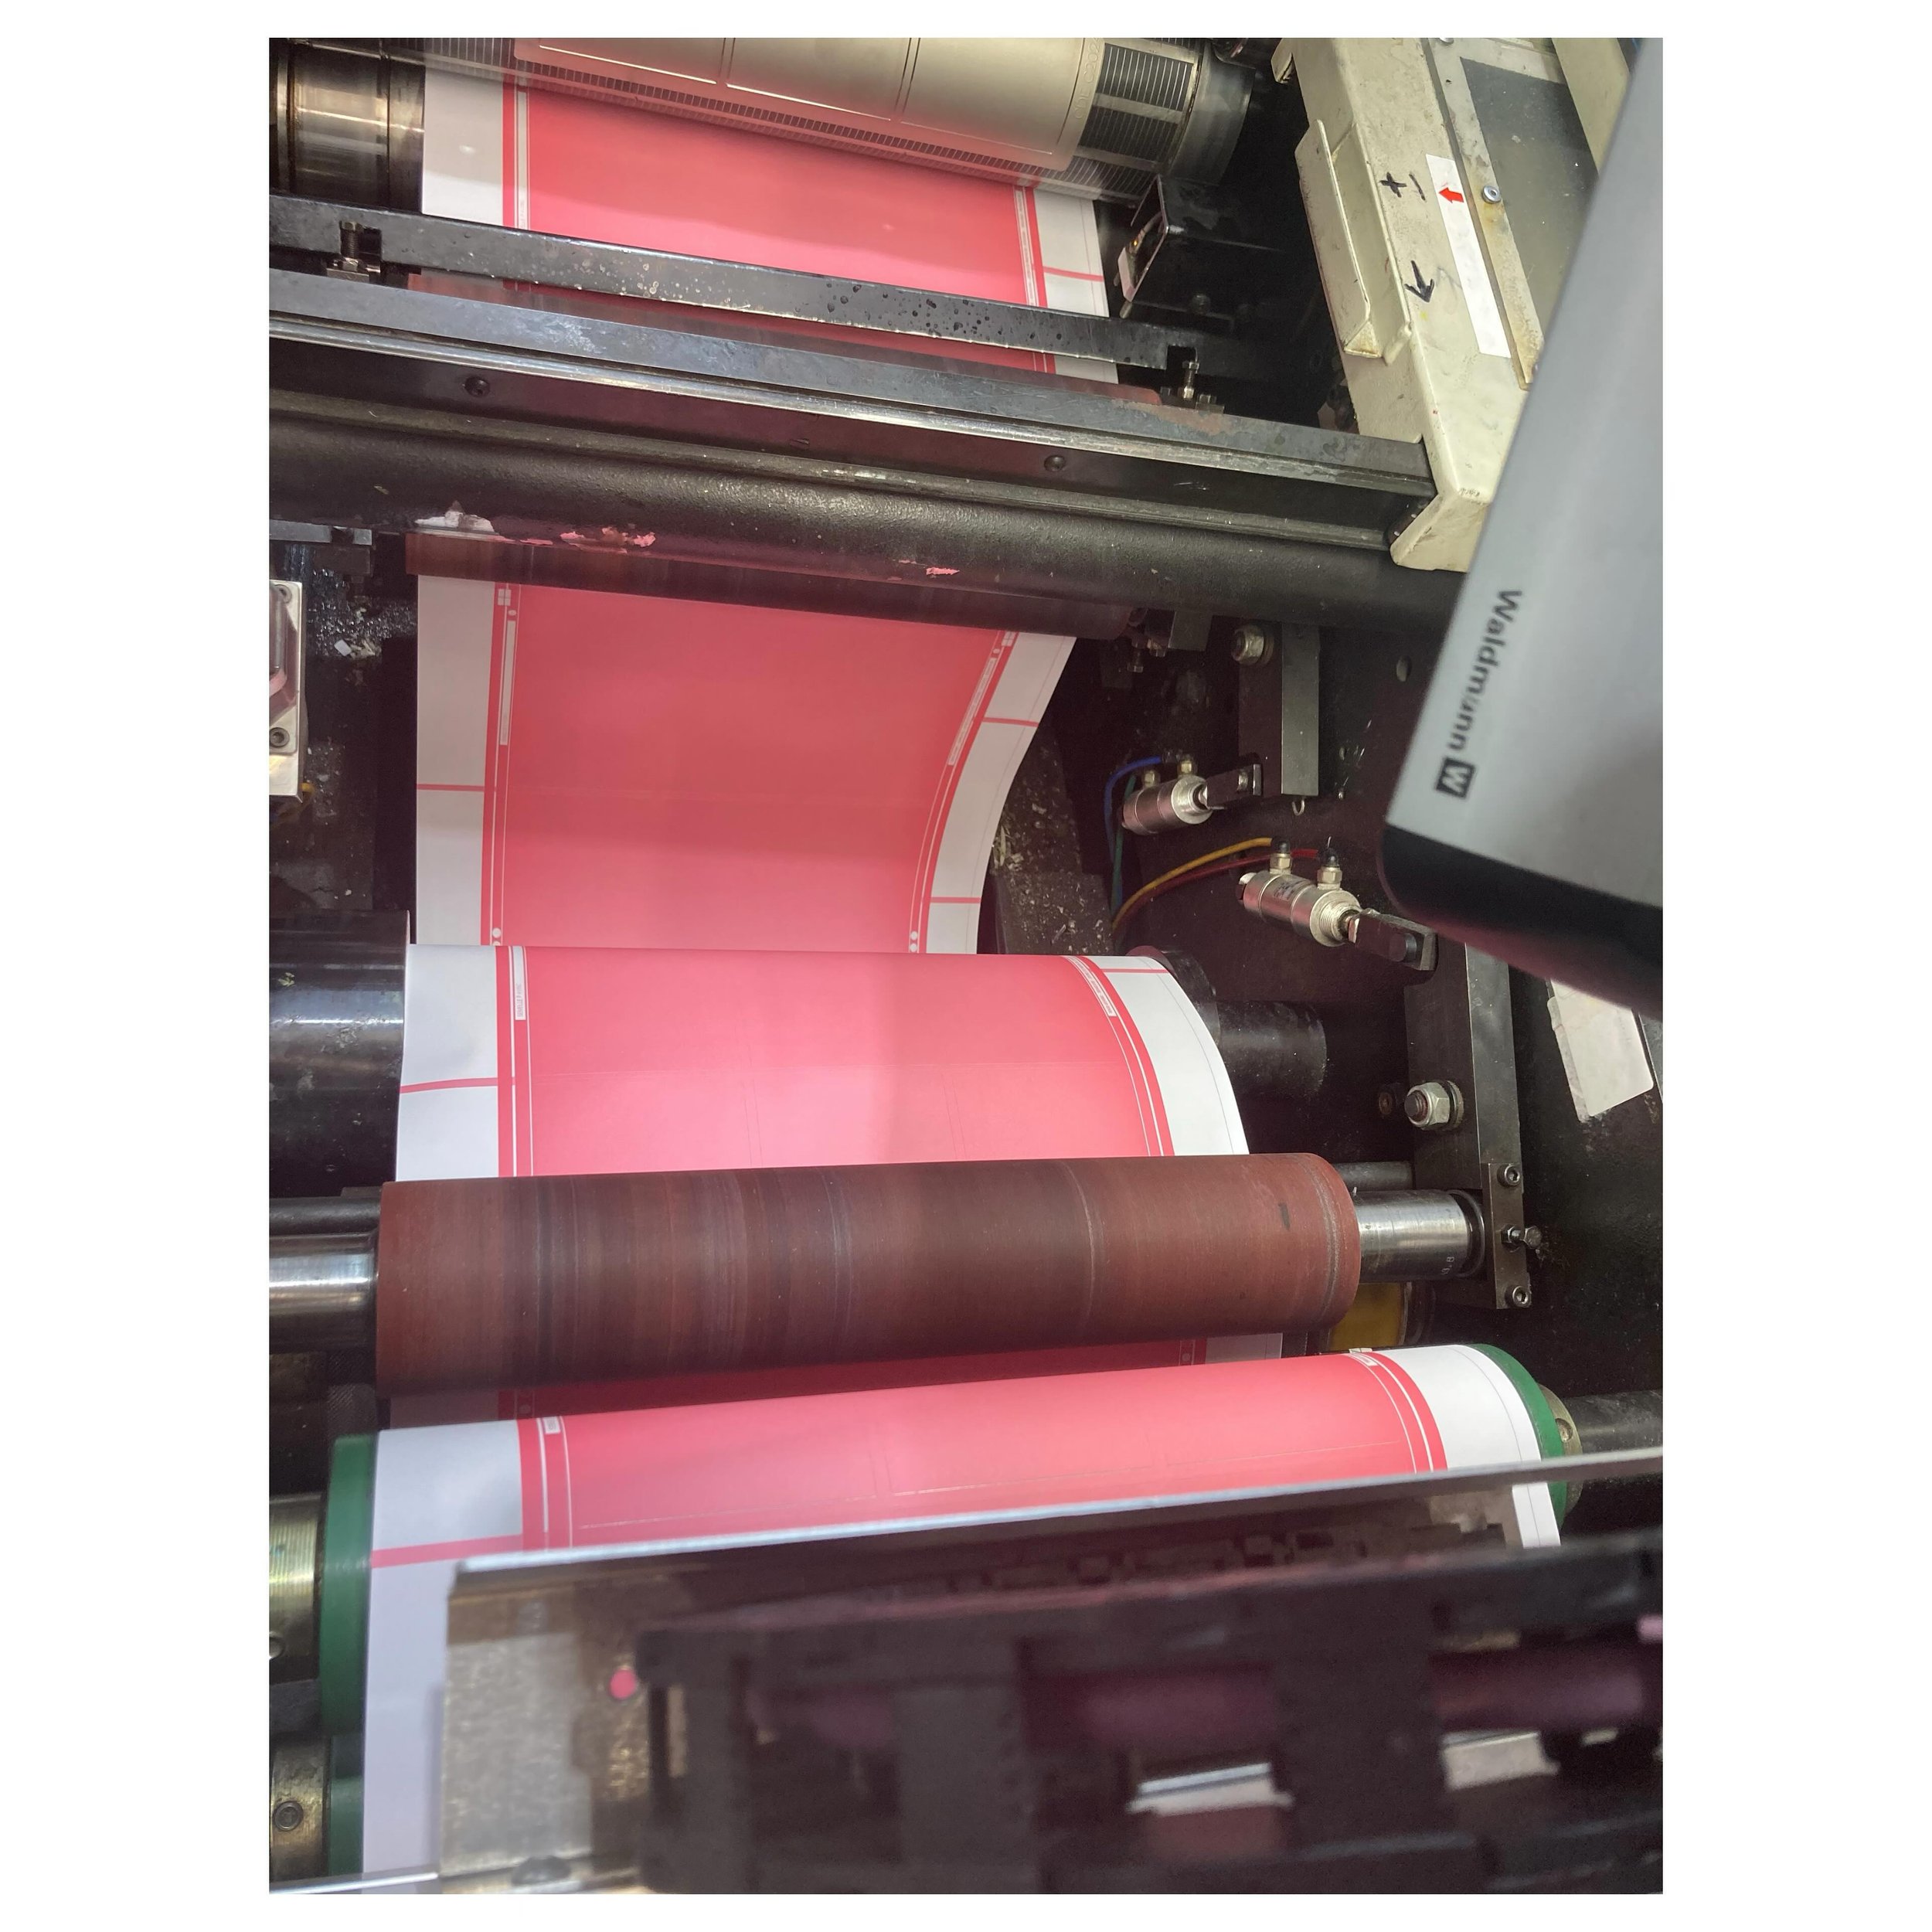 50 shades of pink&hellip; only one is still standing after many meetings, trials, exchanges. This morning, it was our turn to stand at the presses. So exciting to discover the pink and see how it presents itself on non-glossy paper. Next comes the de